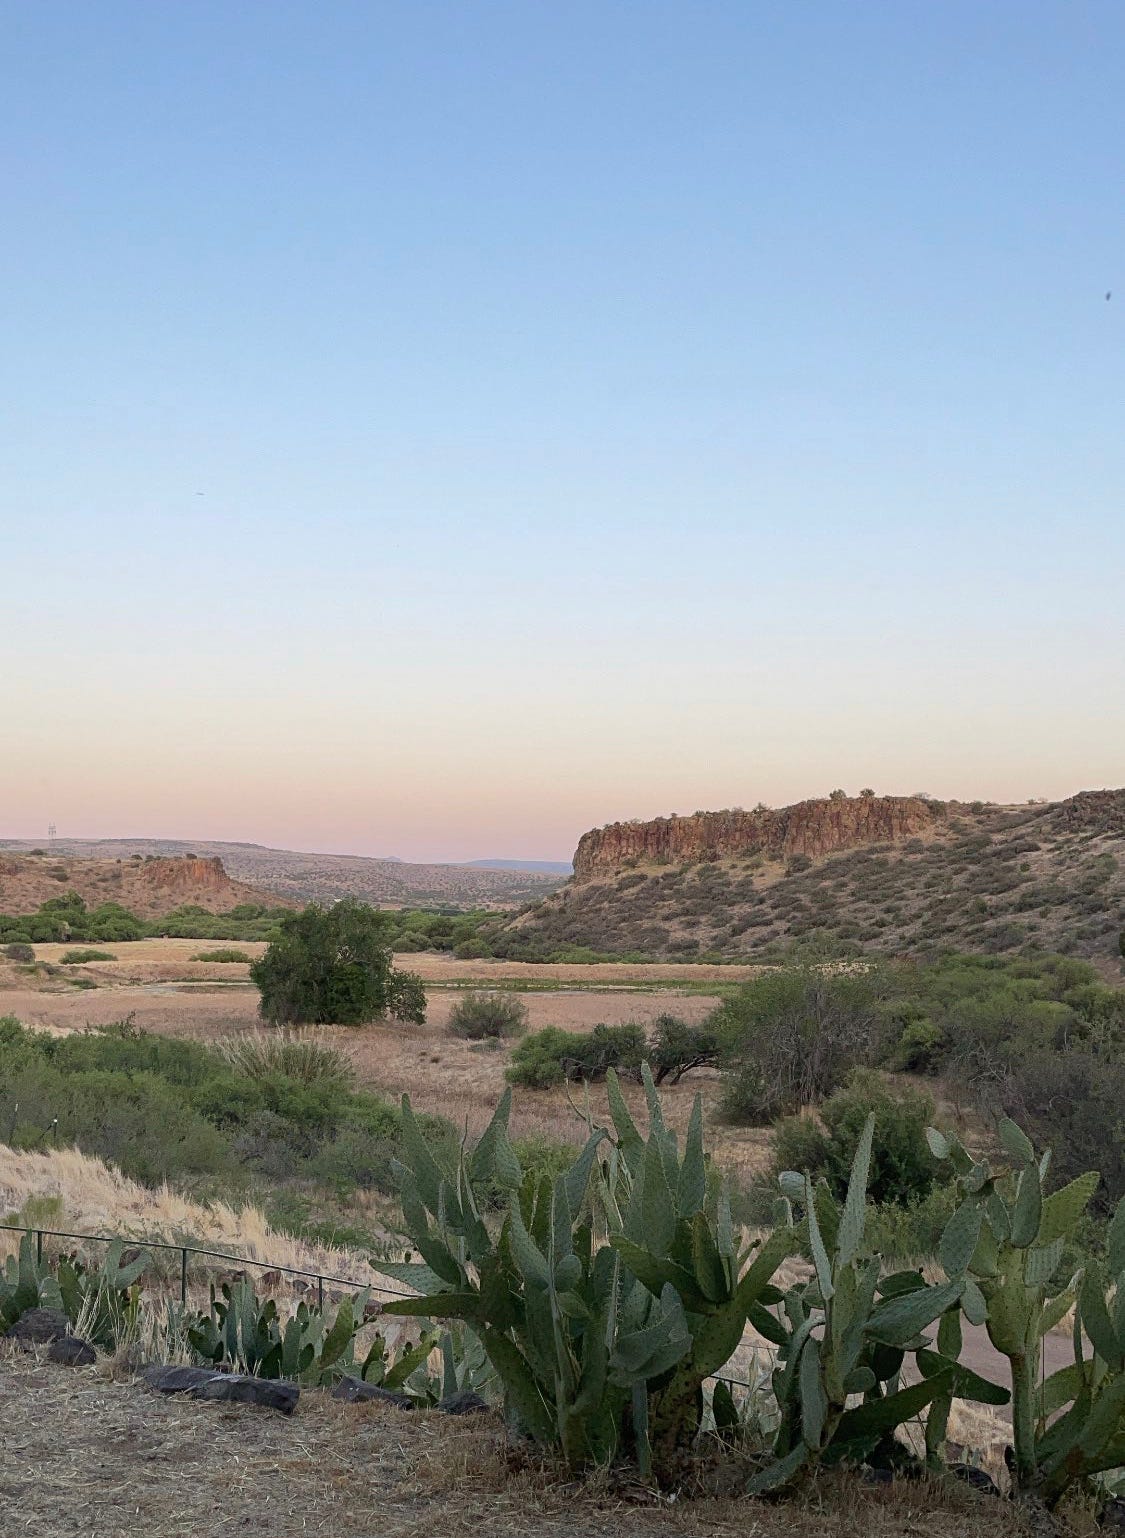 View of the desert from Arcosanti